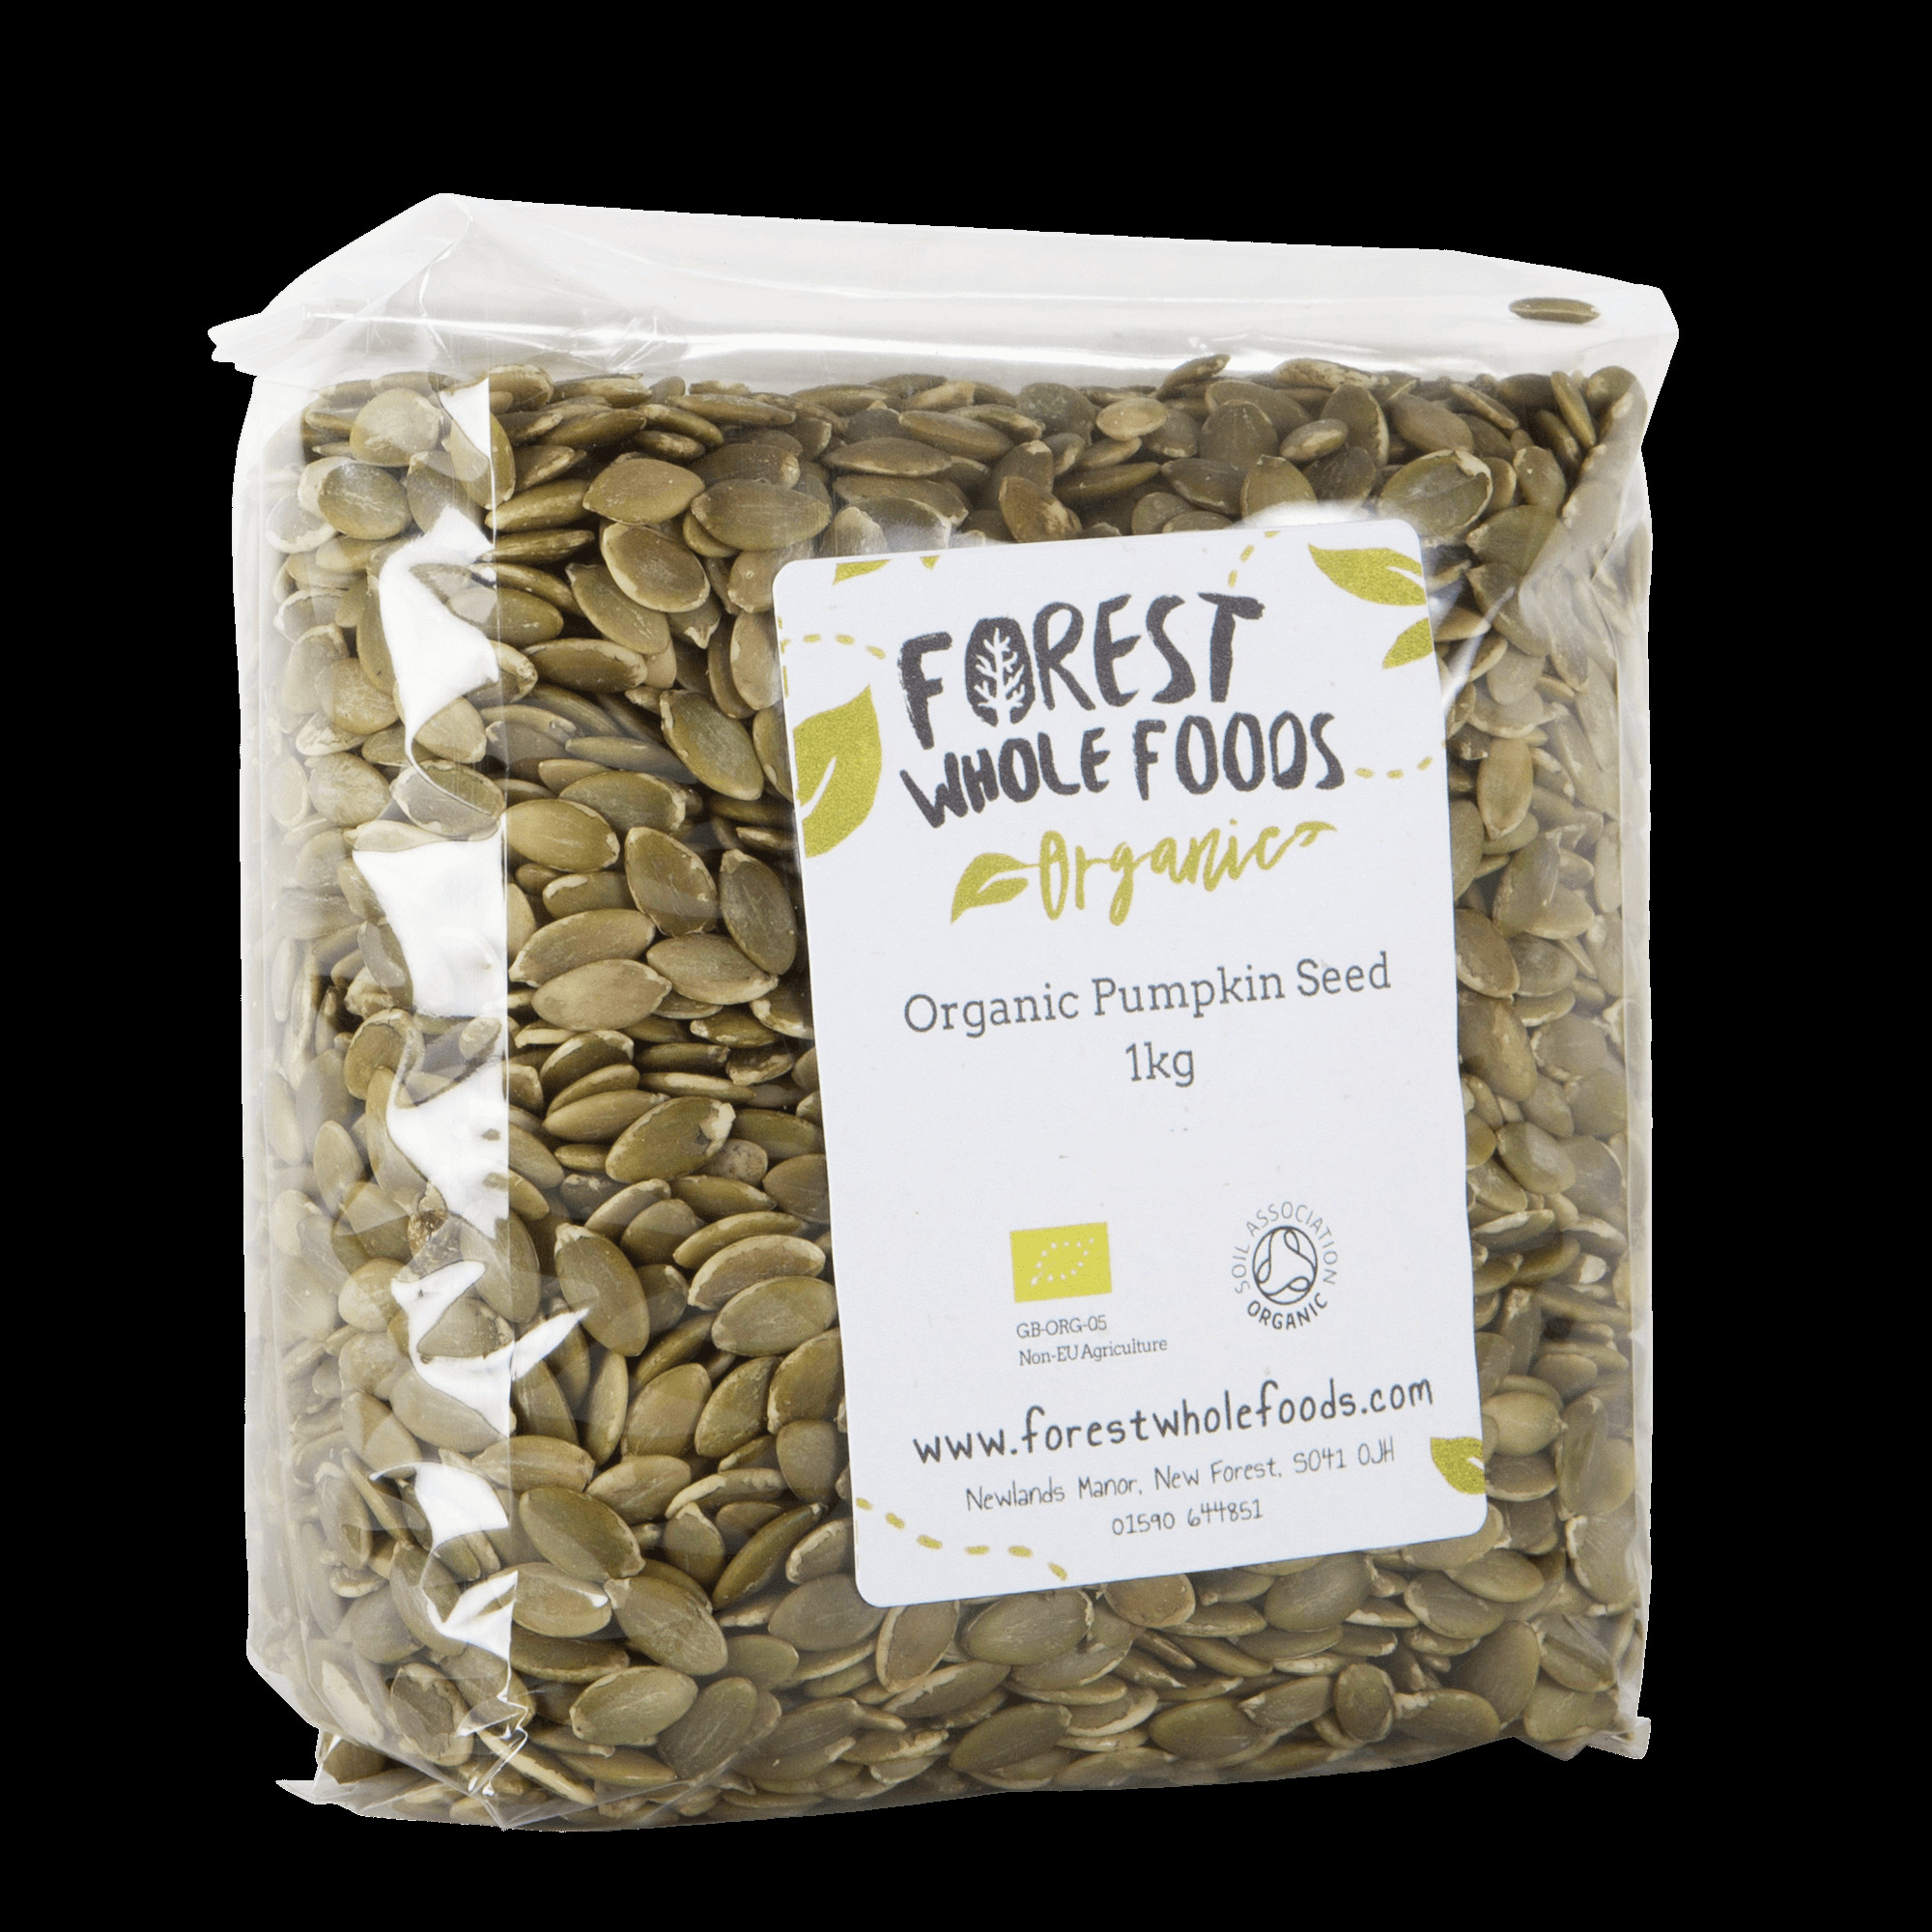 Organic Pumpkin Seeds
 Organic Pumpkin Seeds Forest Whole Foods